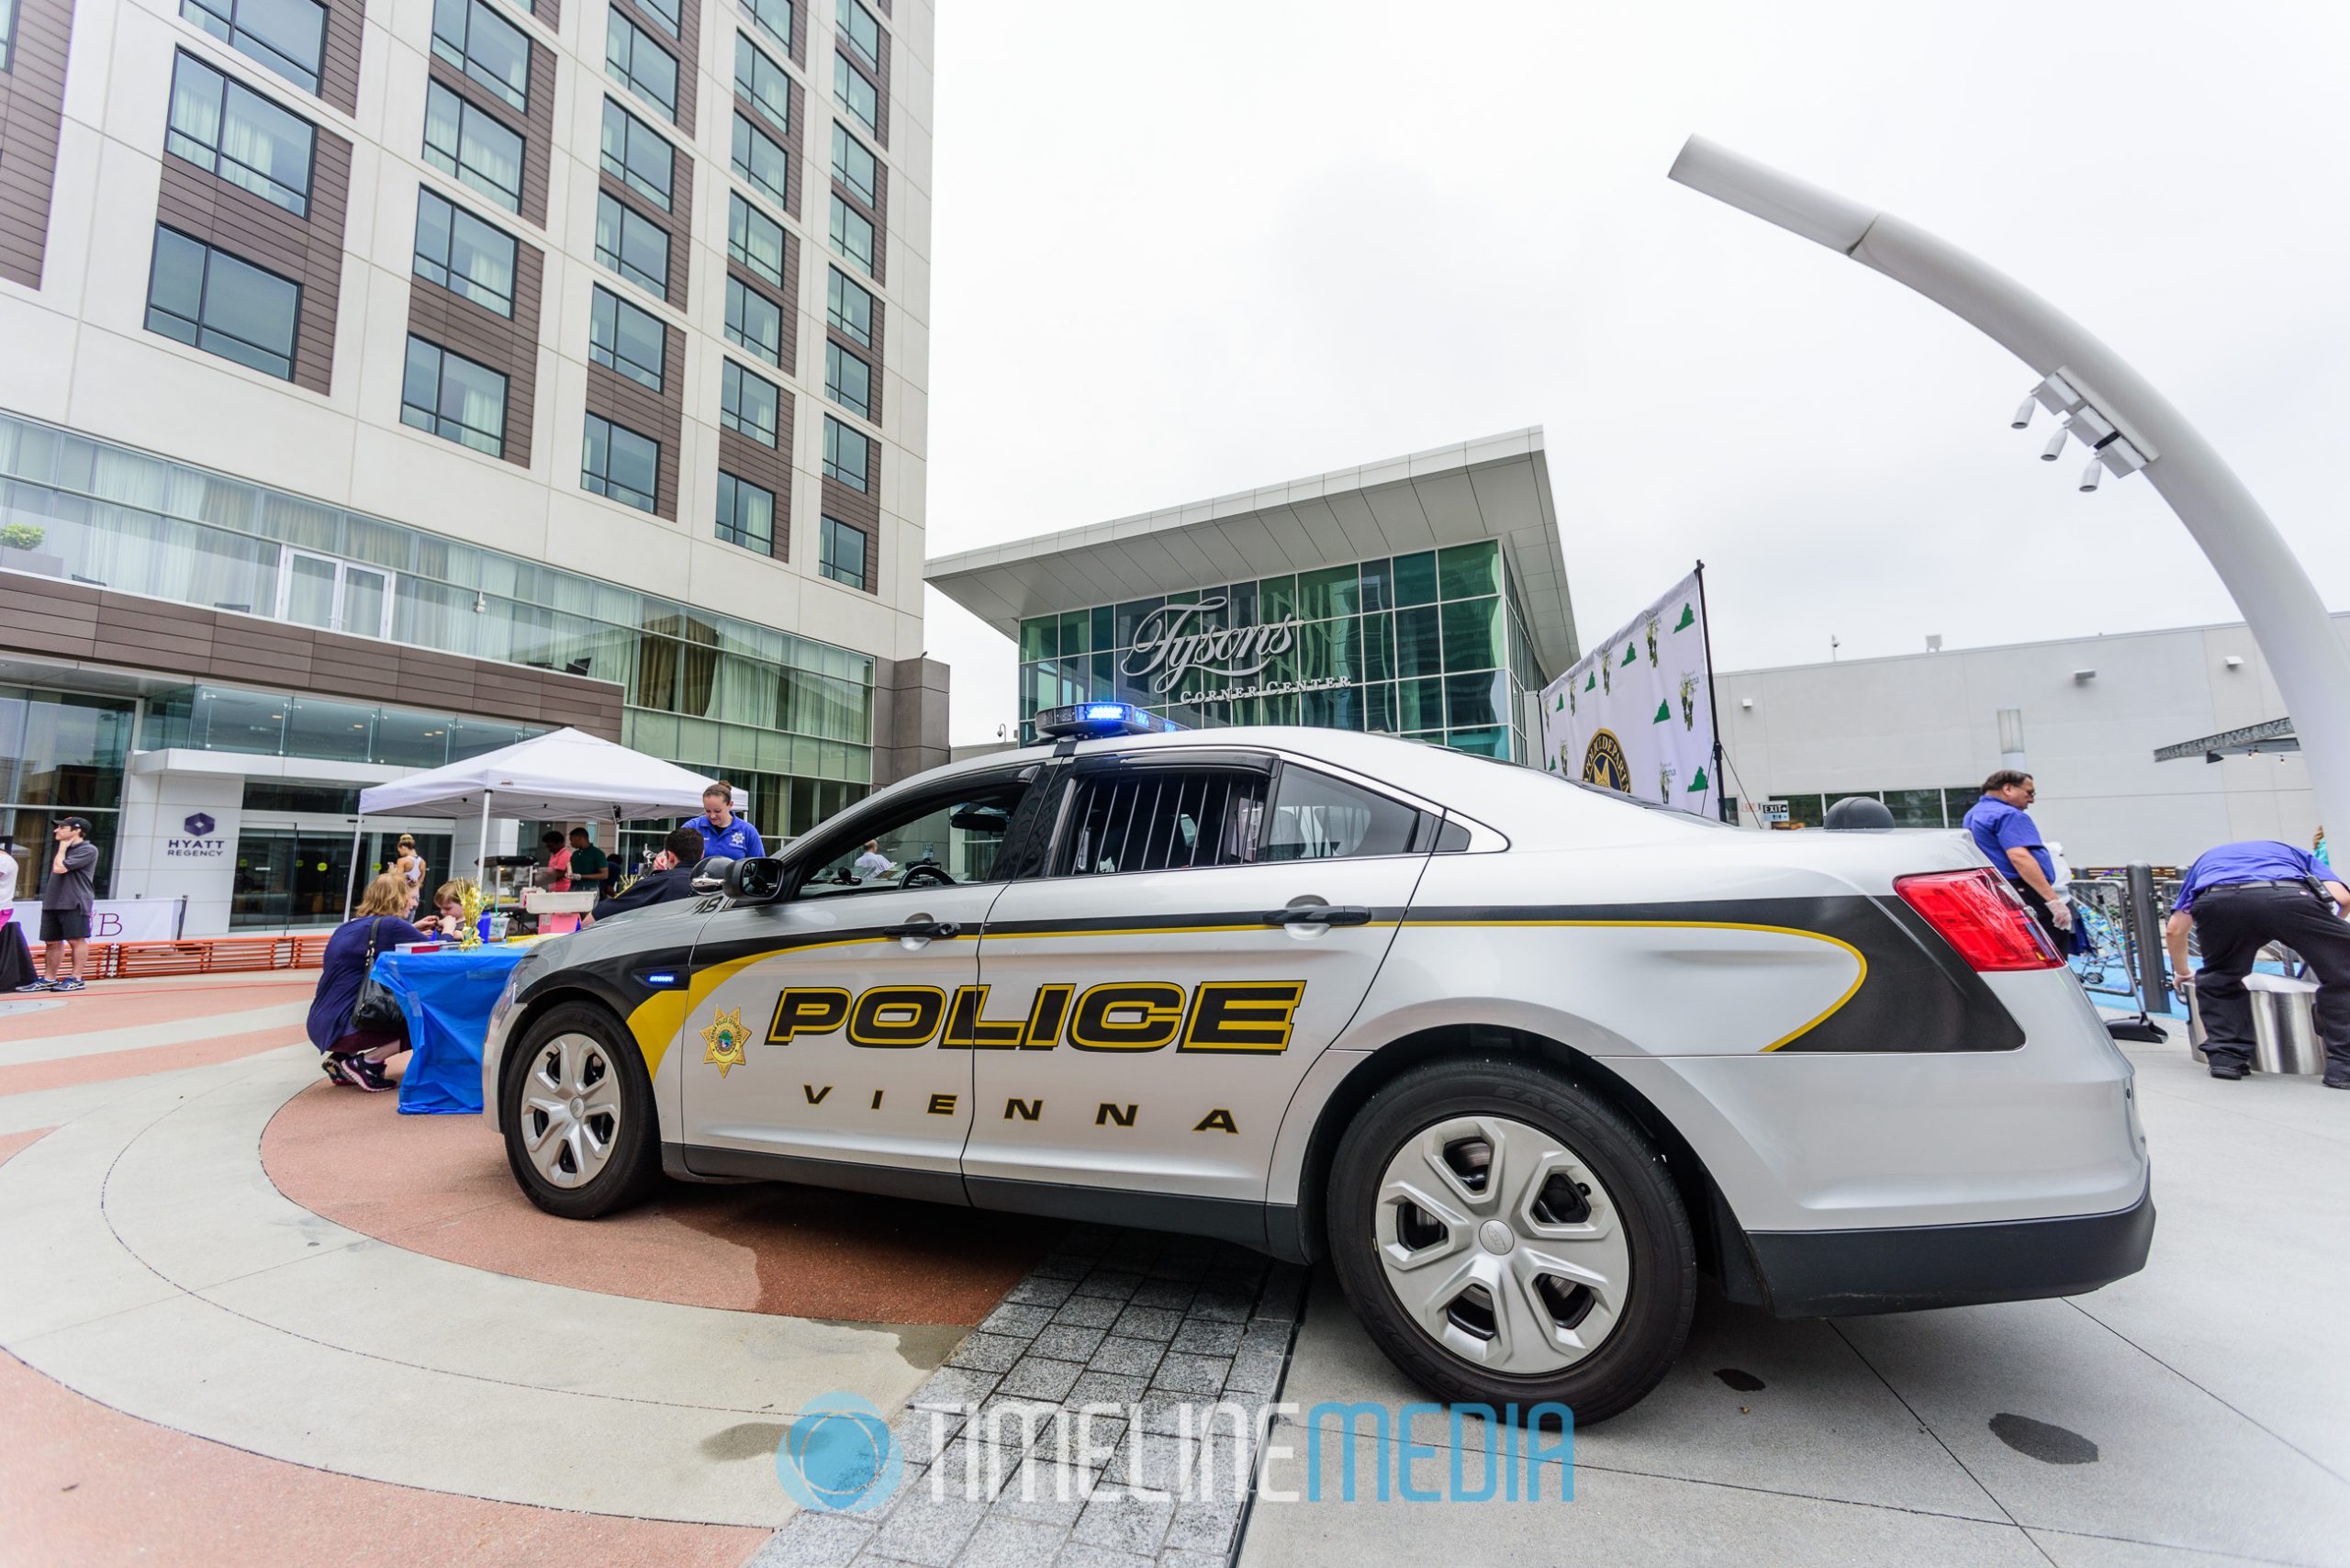 Vienna Virginia Police cruiser on the Plaza at Tysons Corner Center for 2016 First Reponders Day